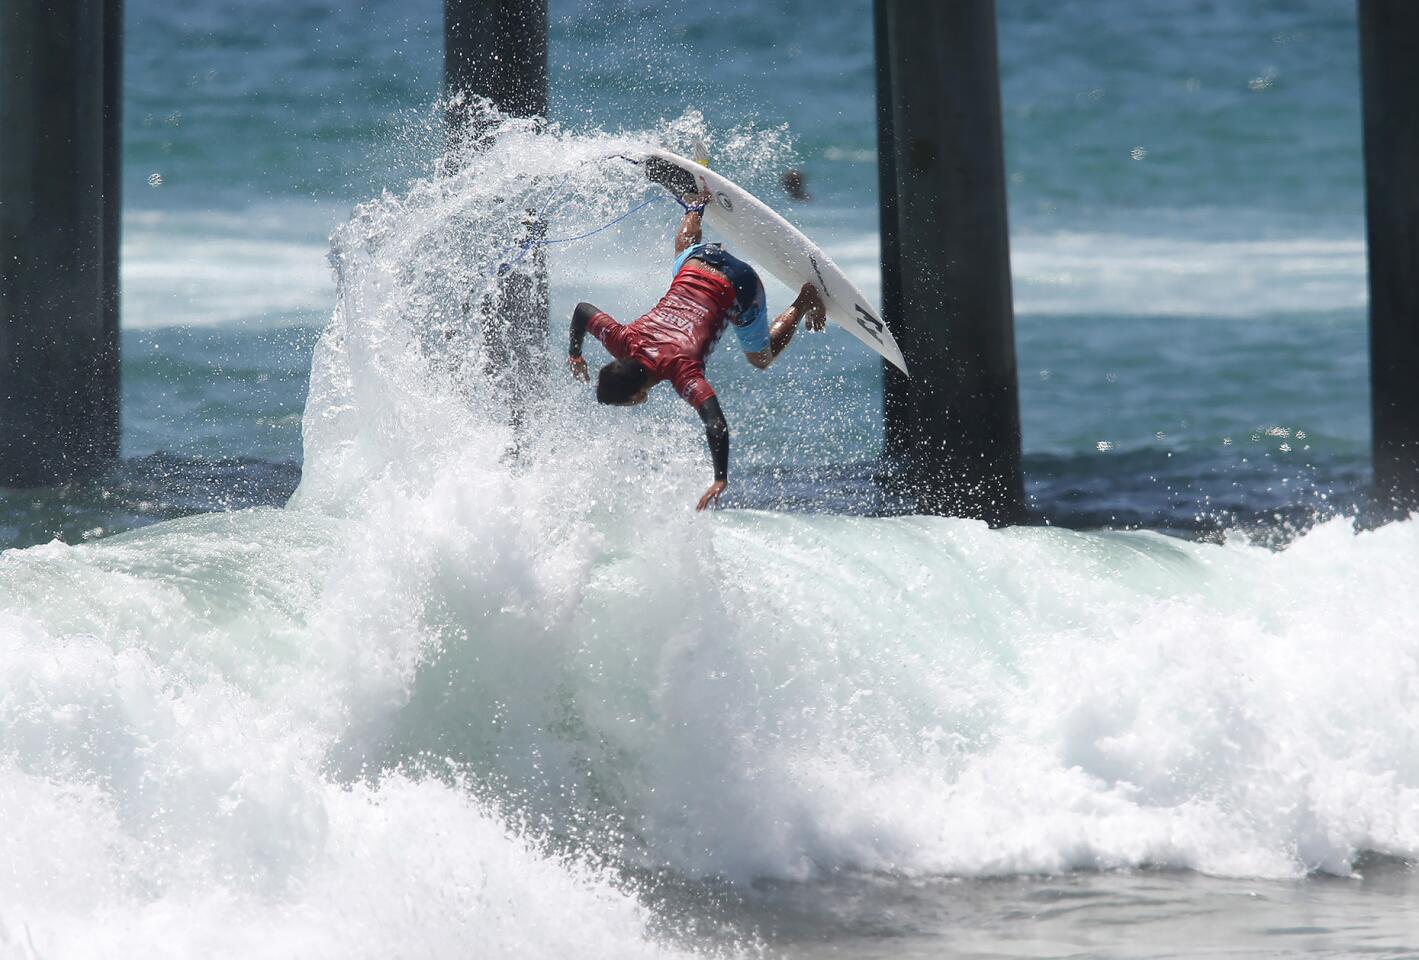 Seth Moniz completes an almost upside down backside air reverse in round 5 of the Men's US Open of Surfing on Saturday.